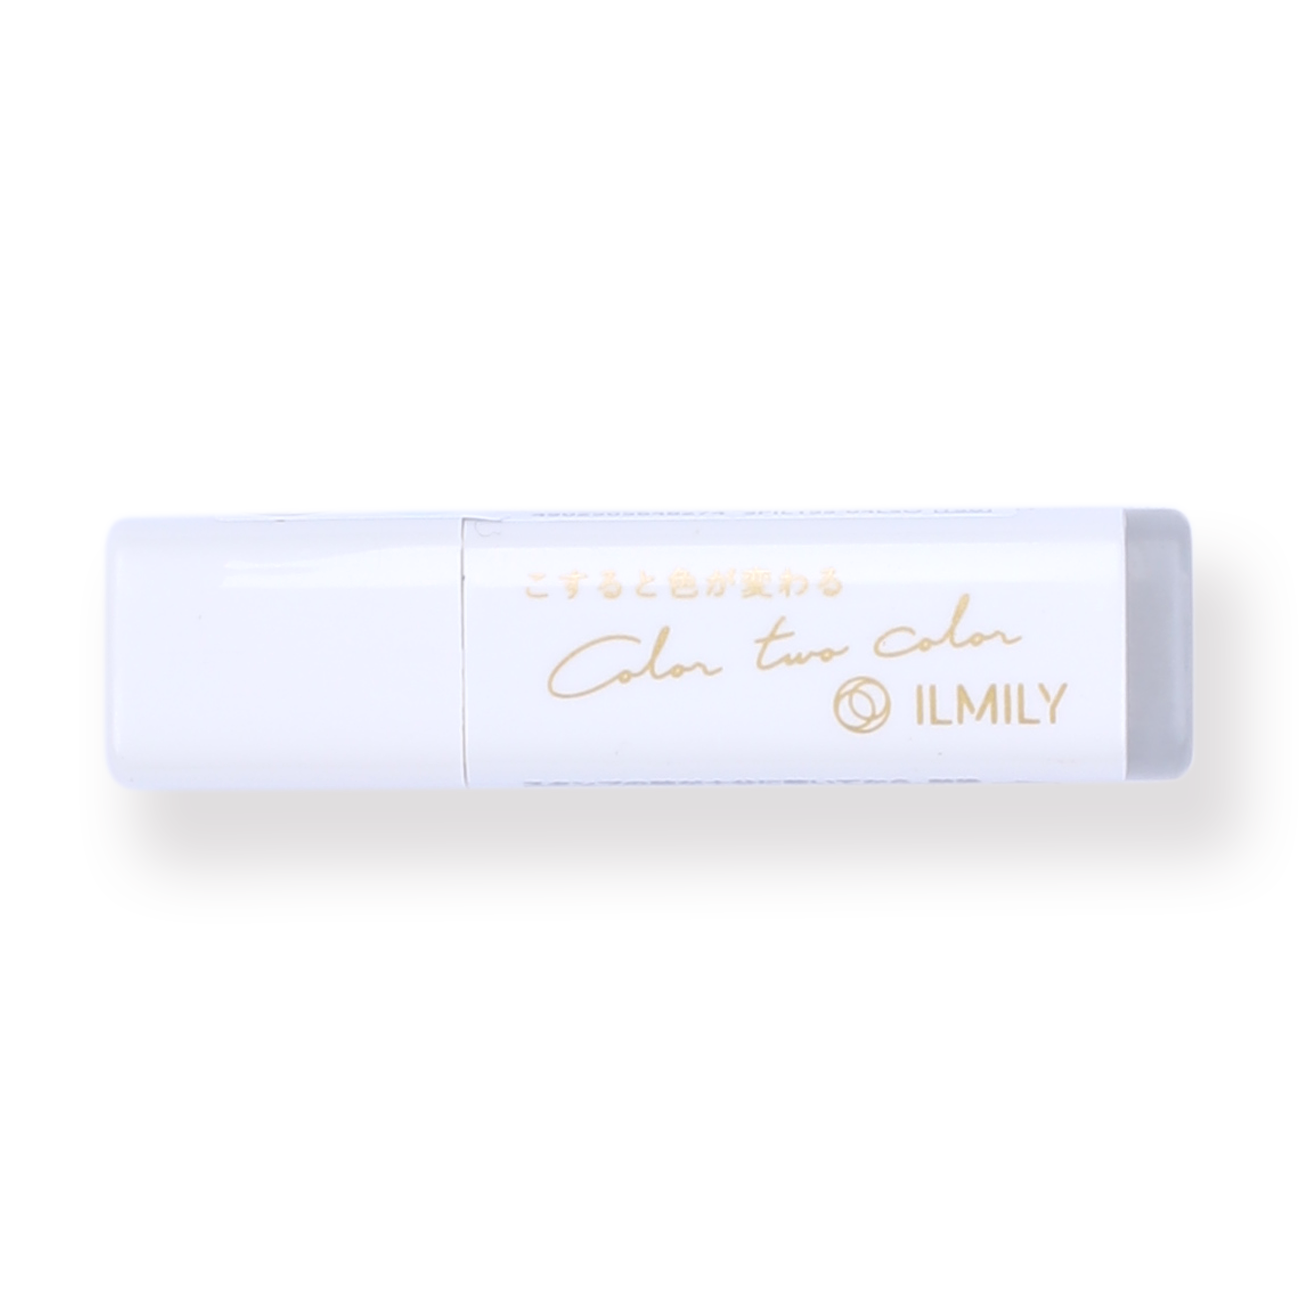 Pilot ILMILY Limited Edition Erasable Stamp - Cutlery - Stationery Pal